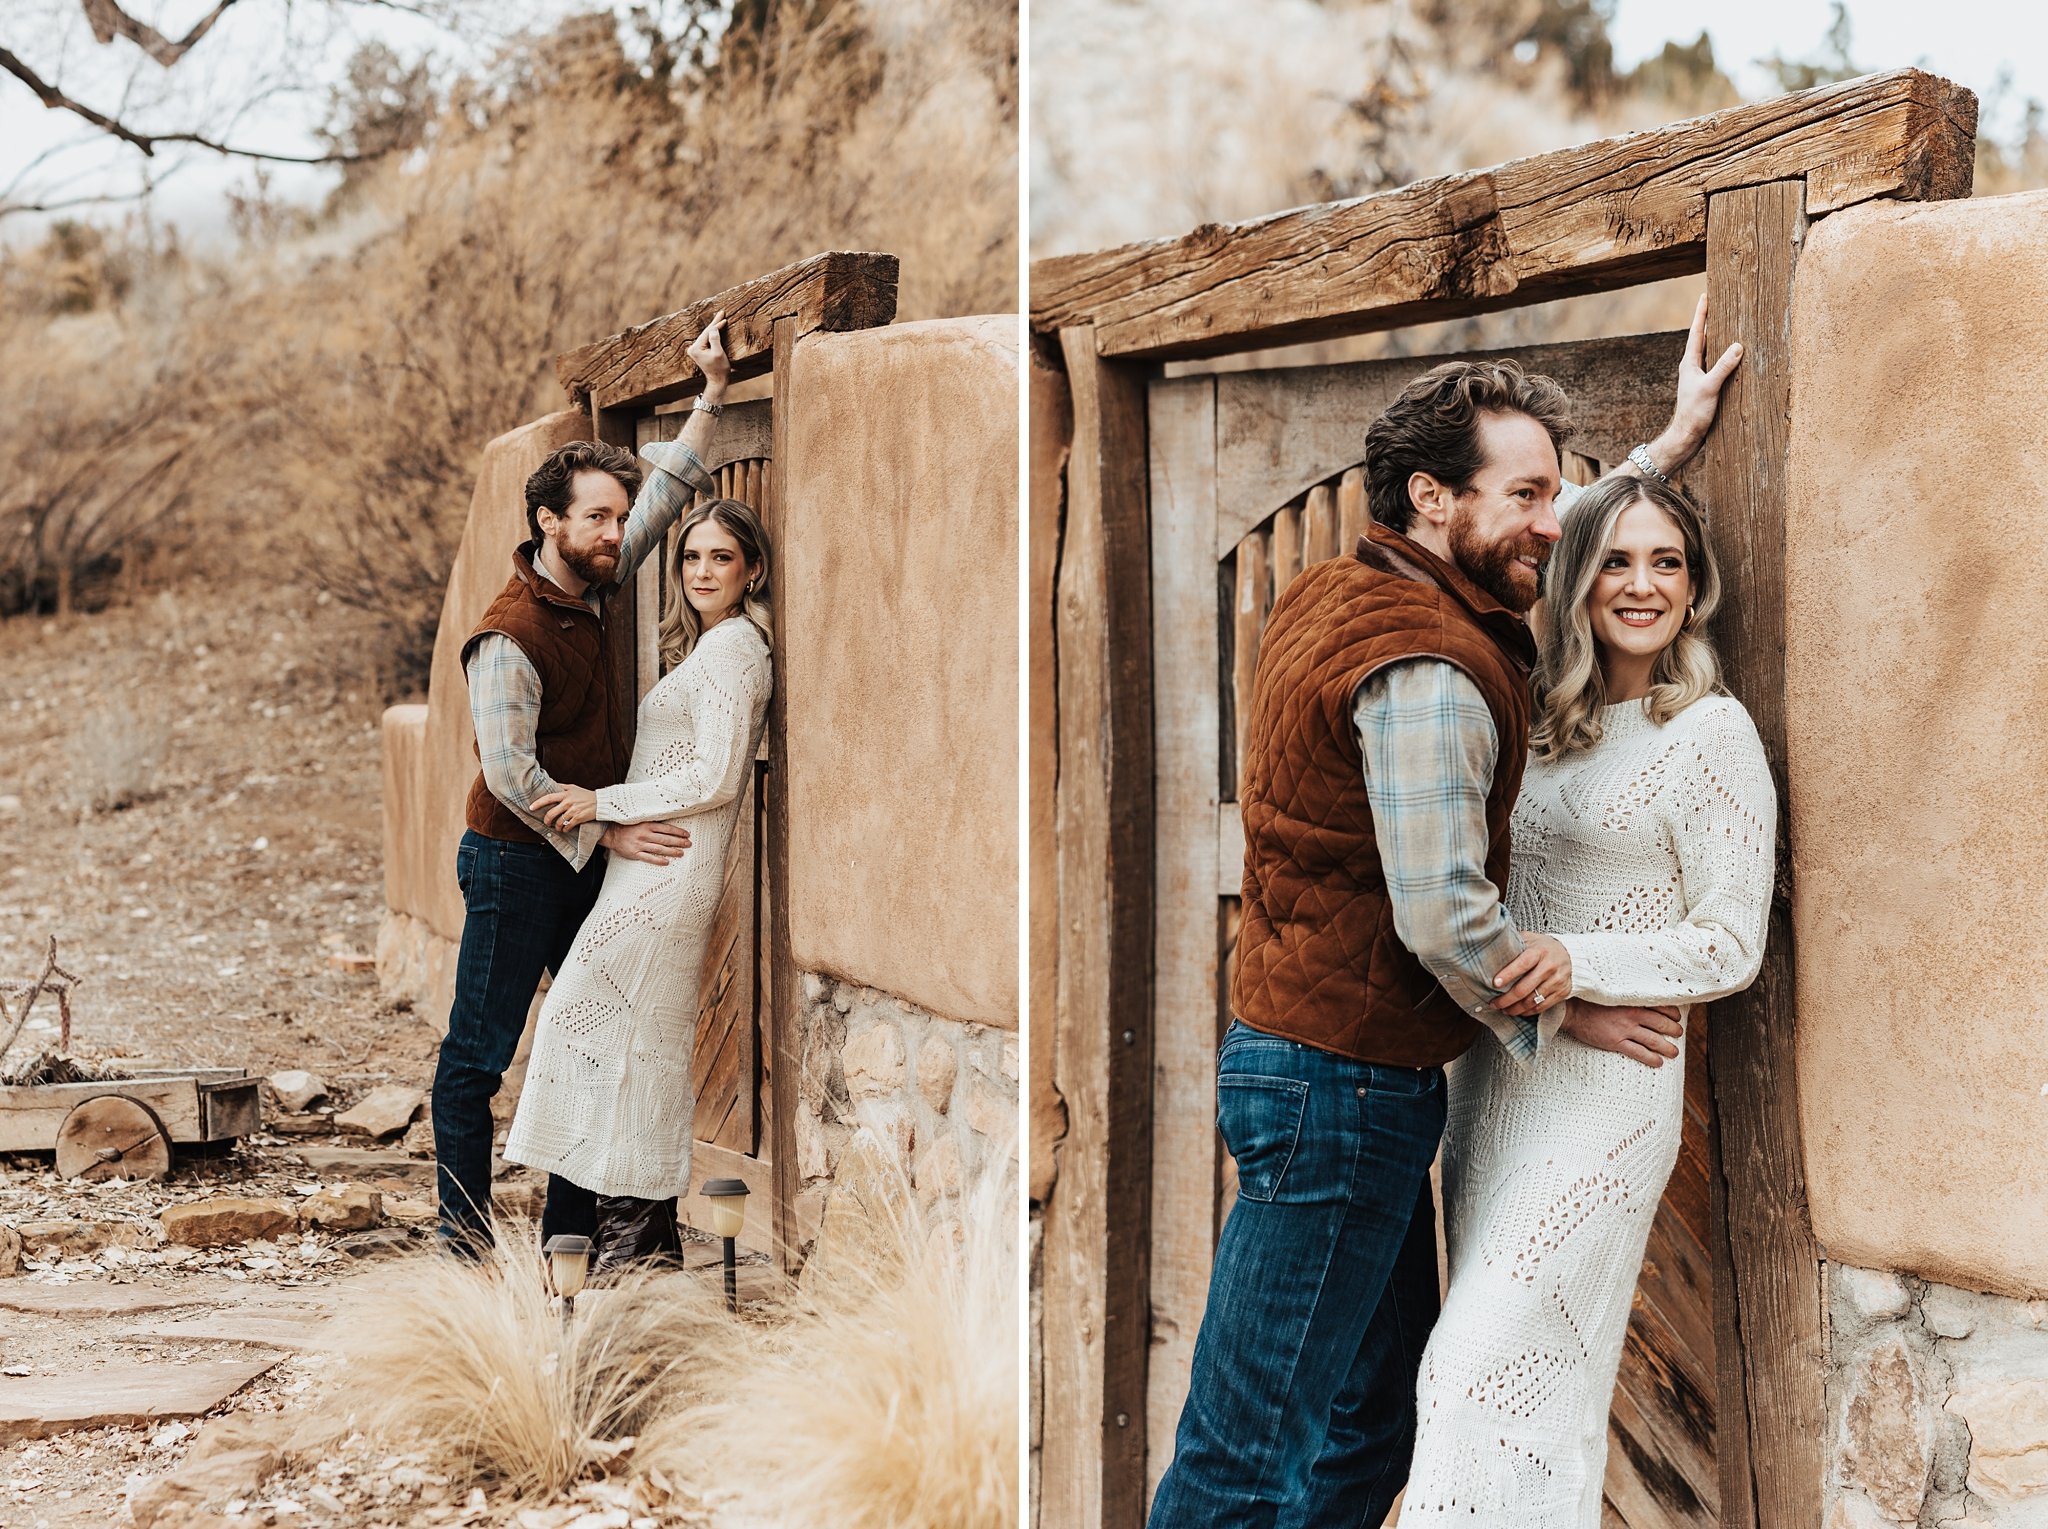 Alicia+lucia+photography+-+albuquerque+wedding+photographer+-+santa+fe+wedding+photography+-+new+mexico+wedding+photographer+-+new+mexico+wedding+-+southwest+engagement+-+ghost+ranch+engagement+-+ghost+ranch+wedding_0032.jpg